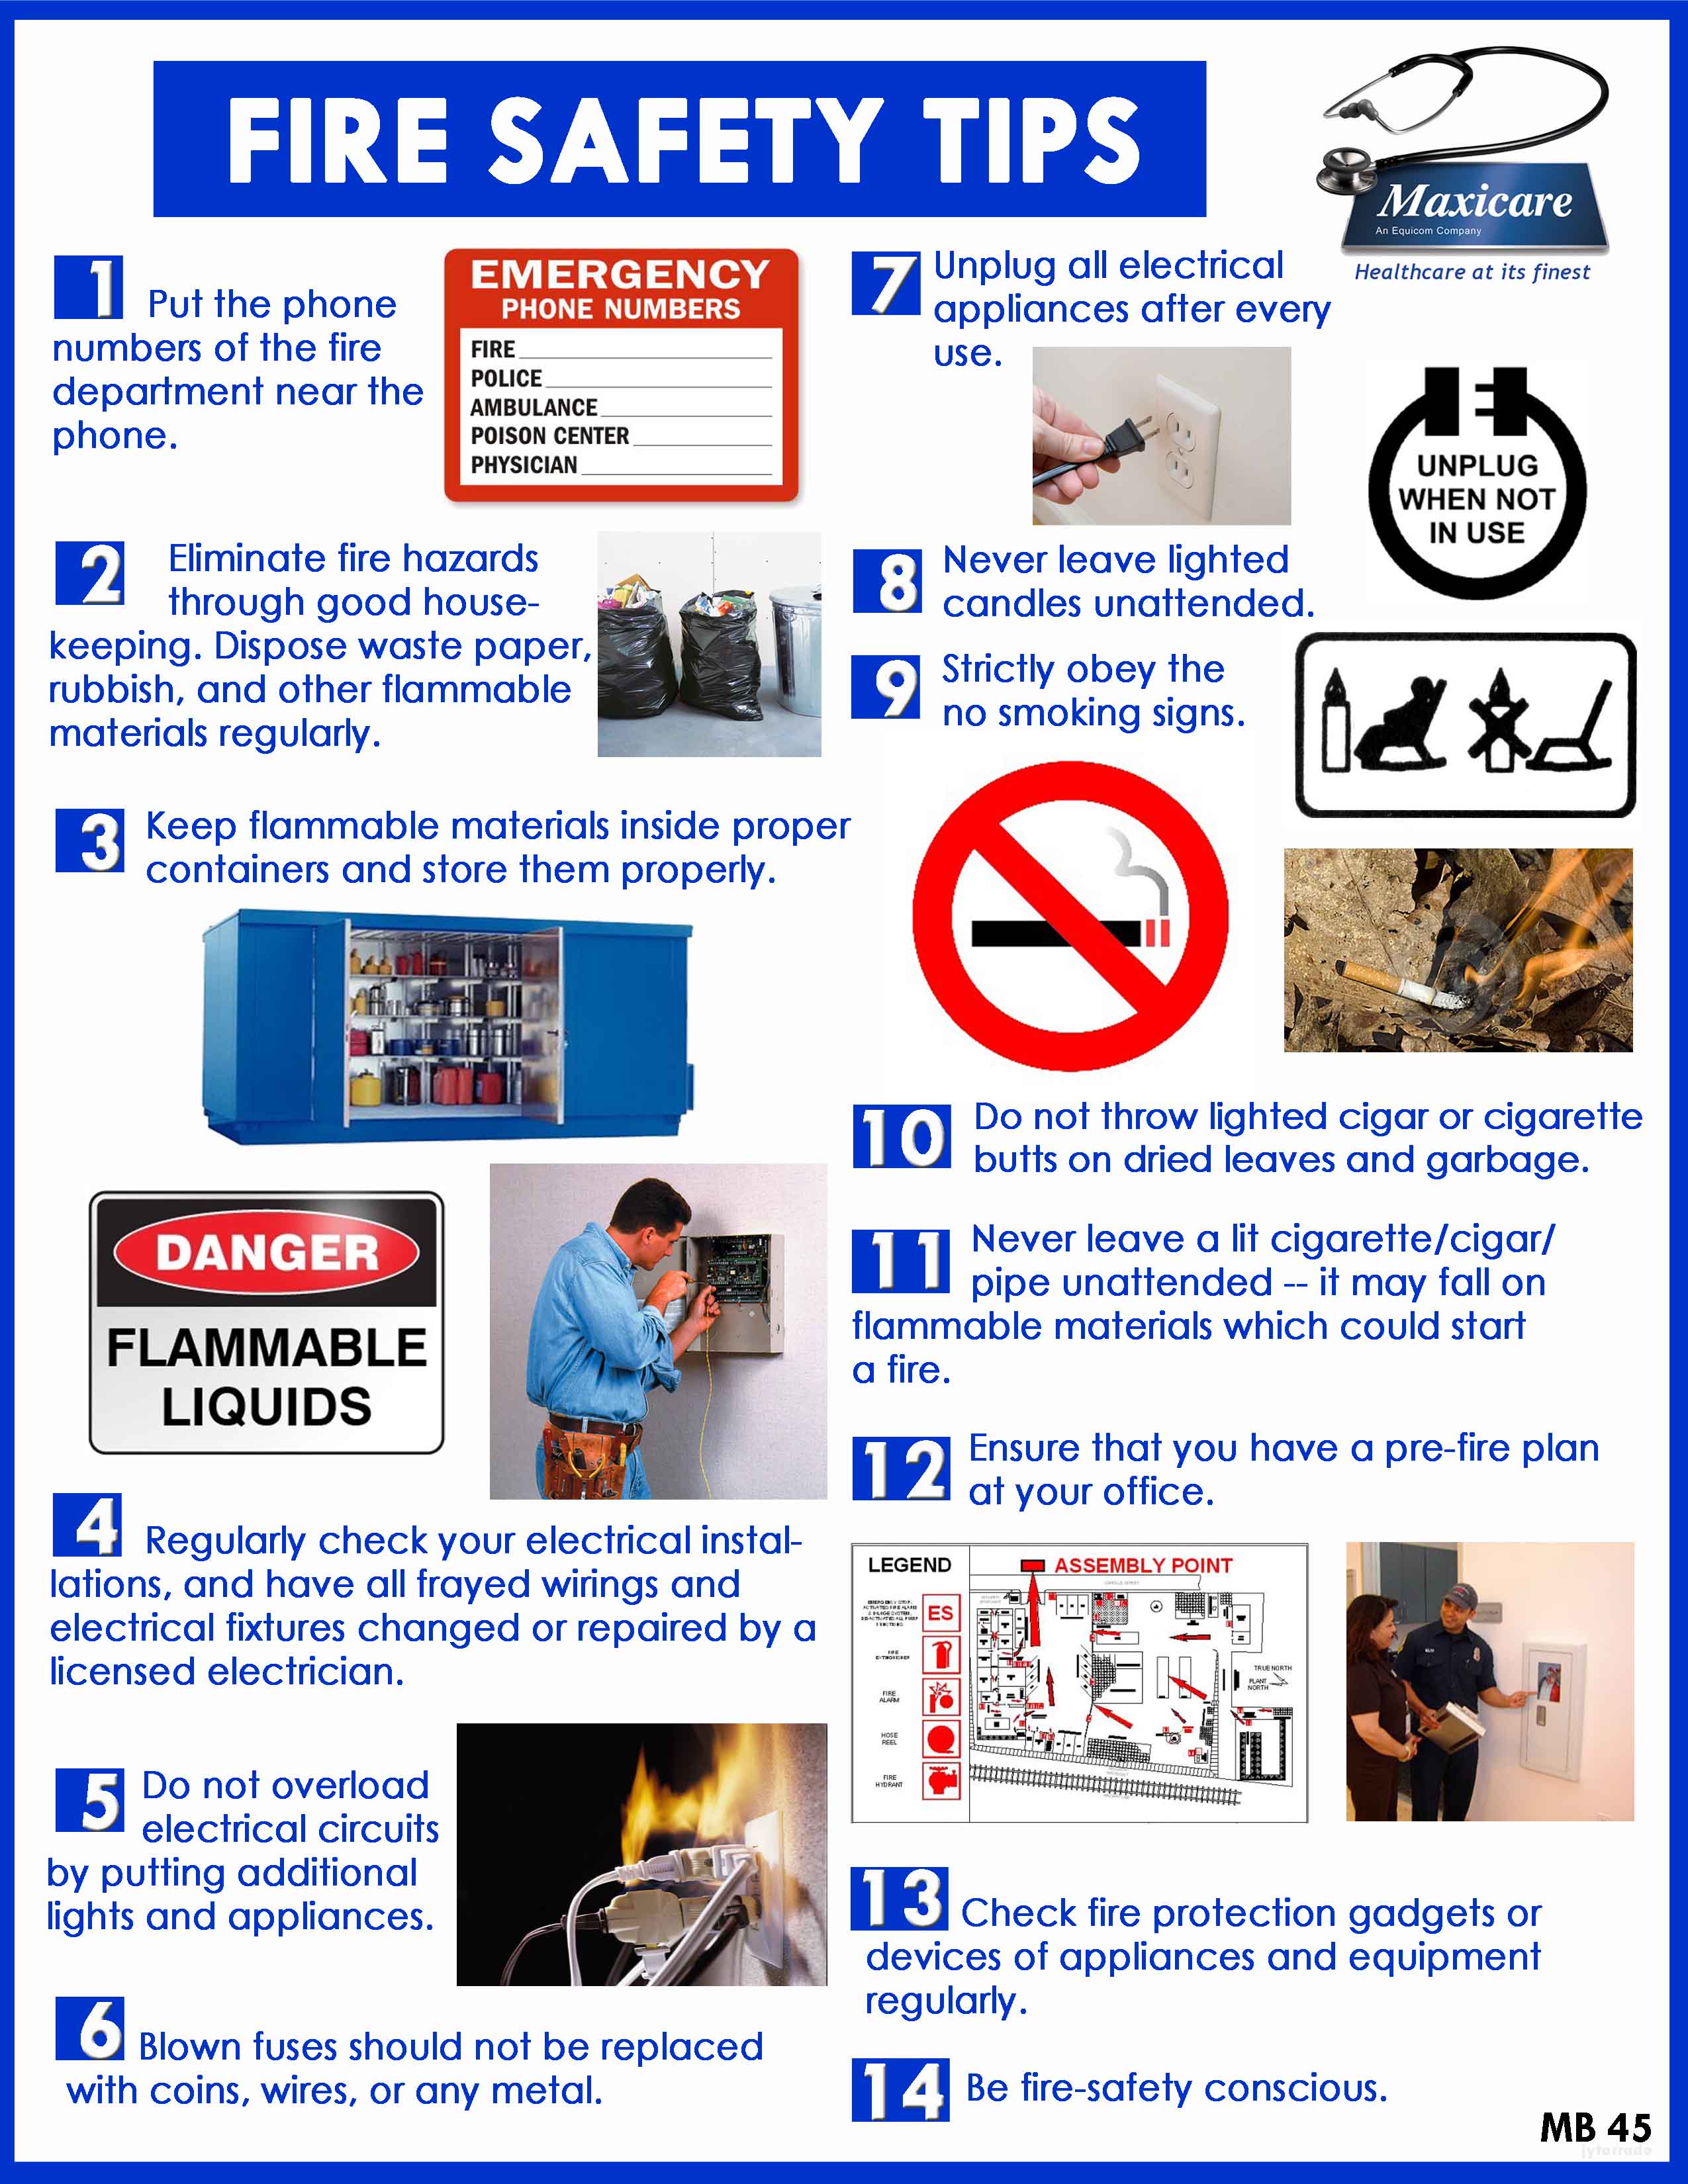 Can You Prevent a Fire? Do’s & Don’ts – Close Range Safety Tips2550 x 3300